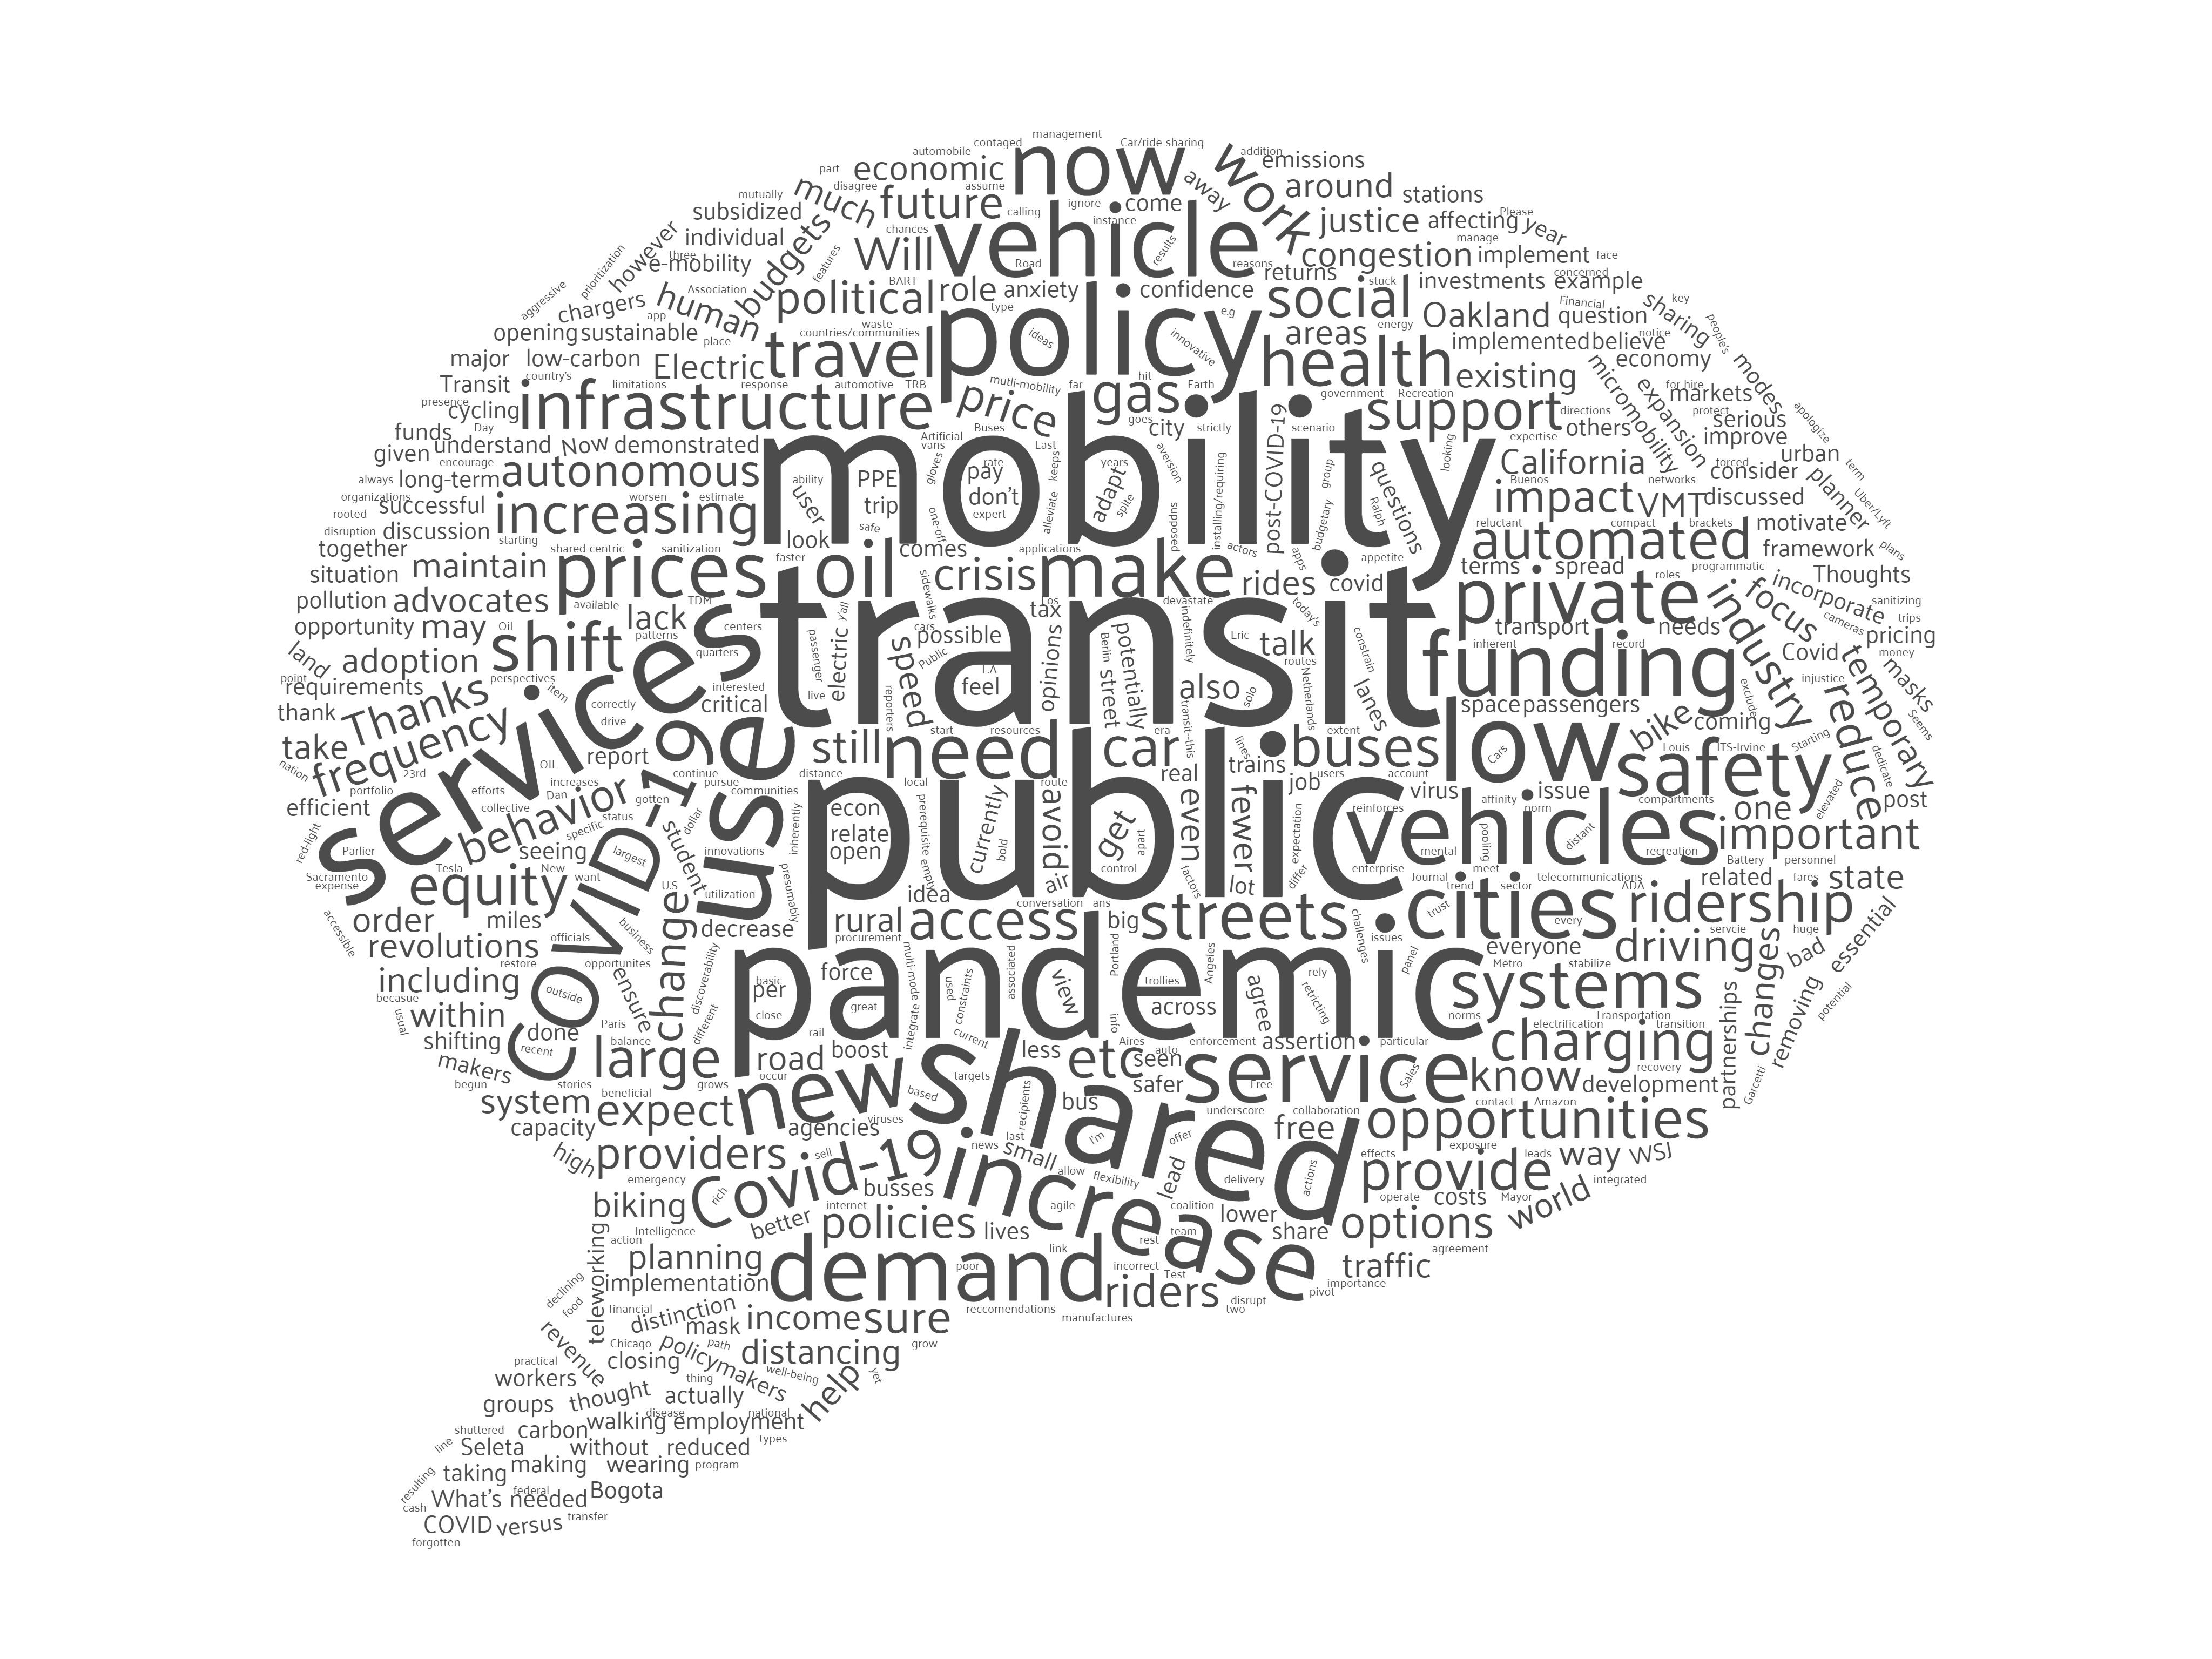 With over 100 questions asked of panelists, we could not post them all, but this is a word cloud representing the text of all questions asked.